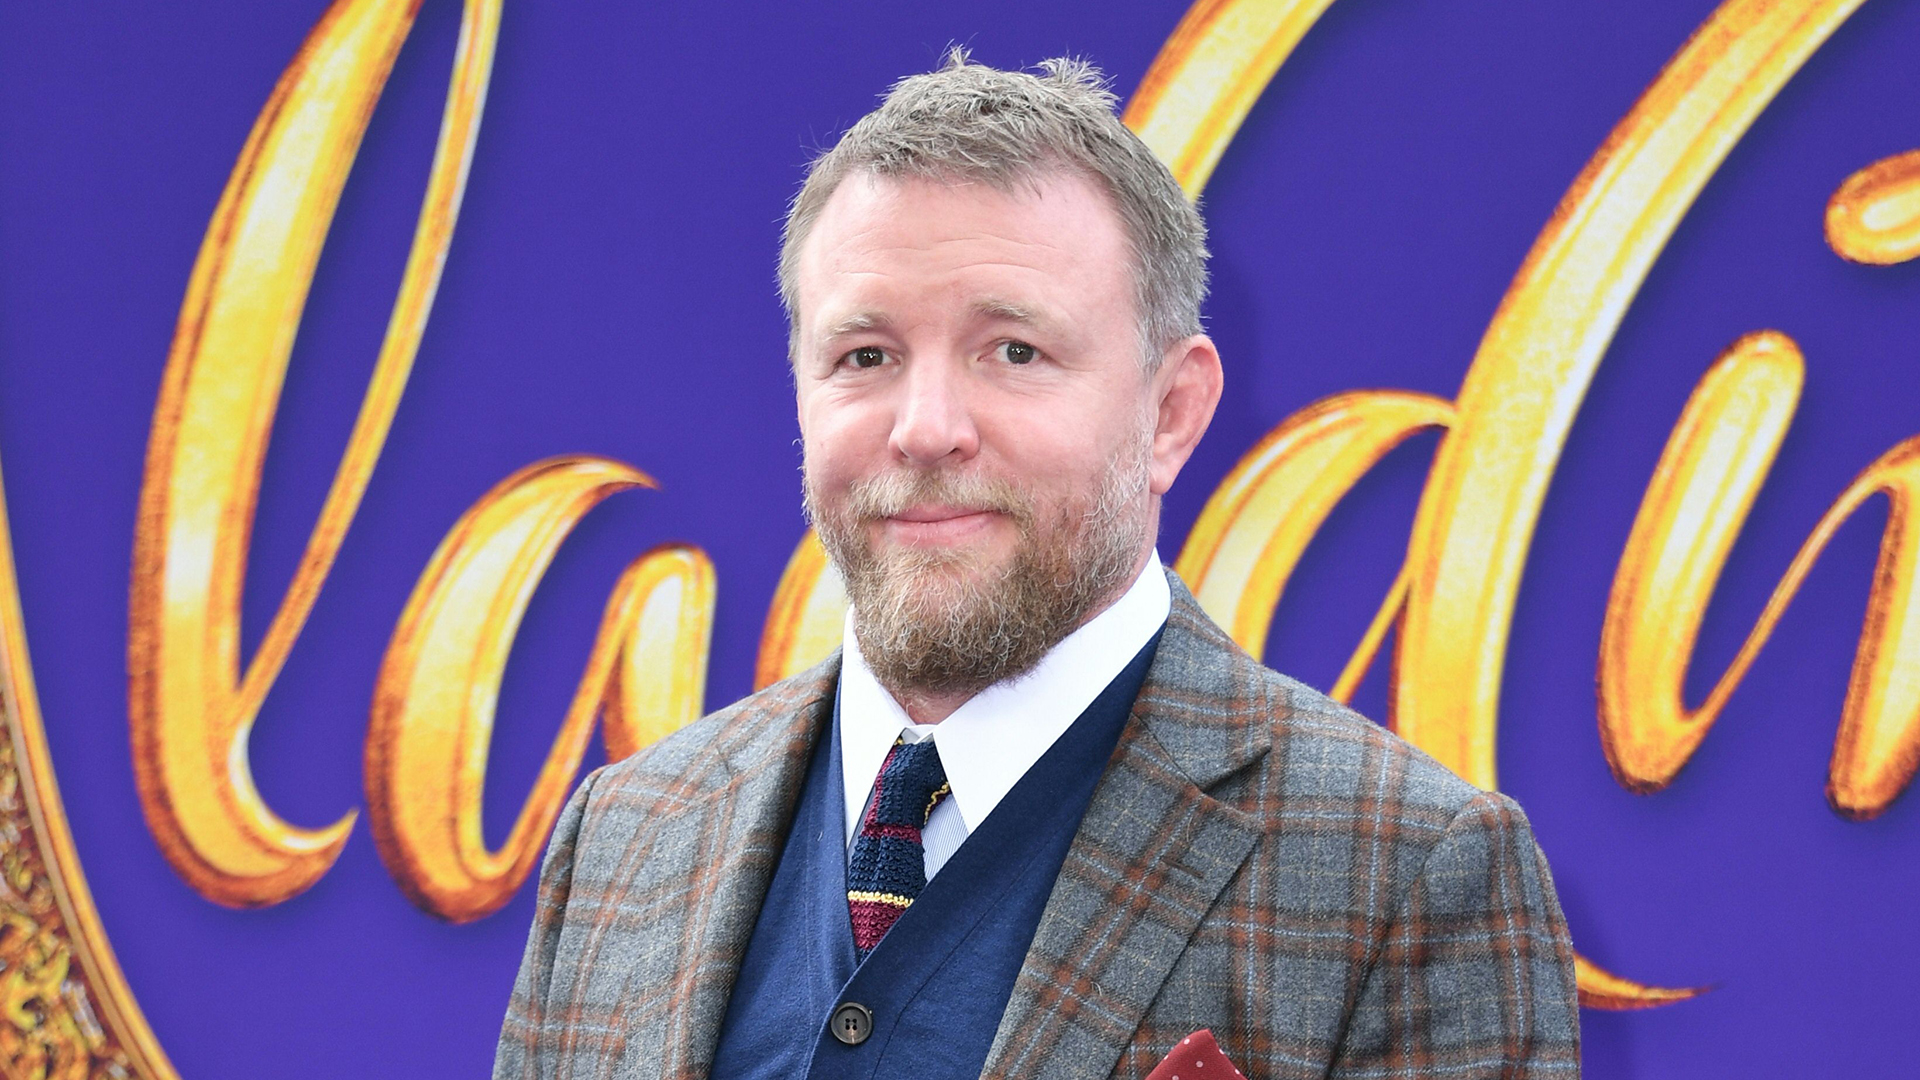 Guy Ritchie Is Set to Direct Live-Action ‘Hercules’ Movie 